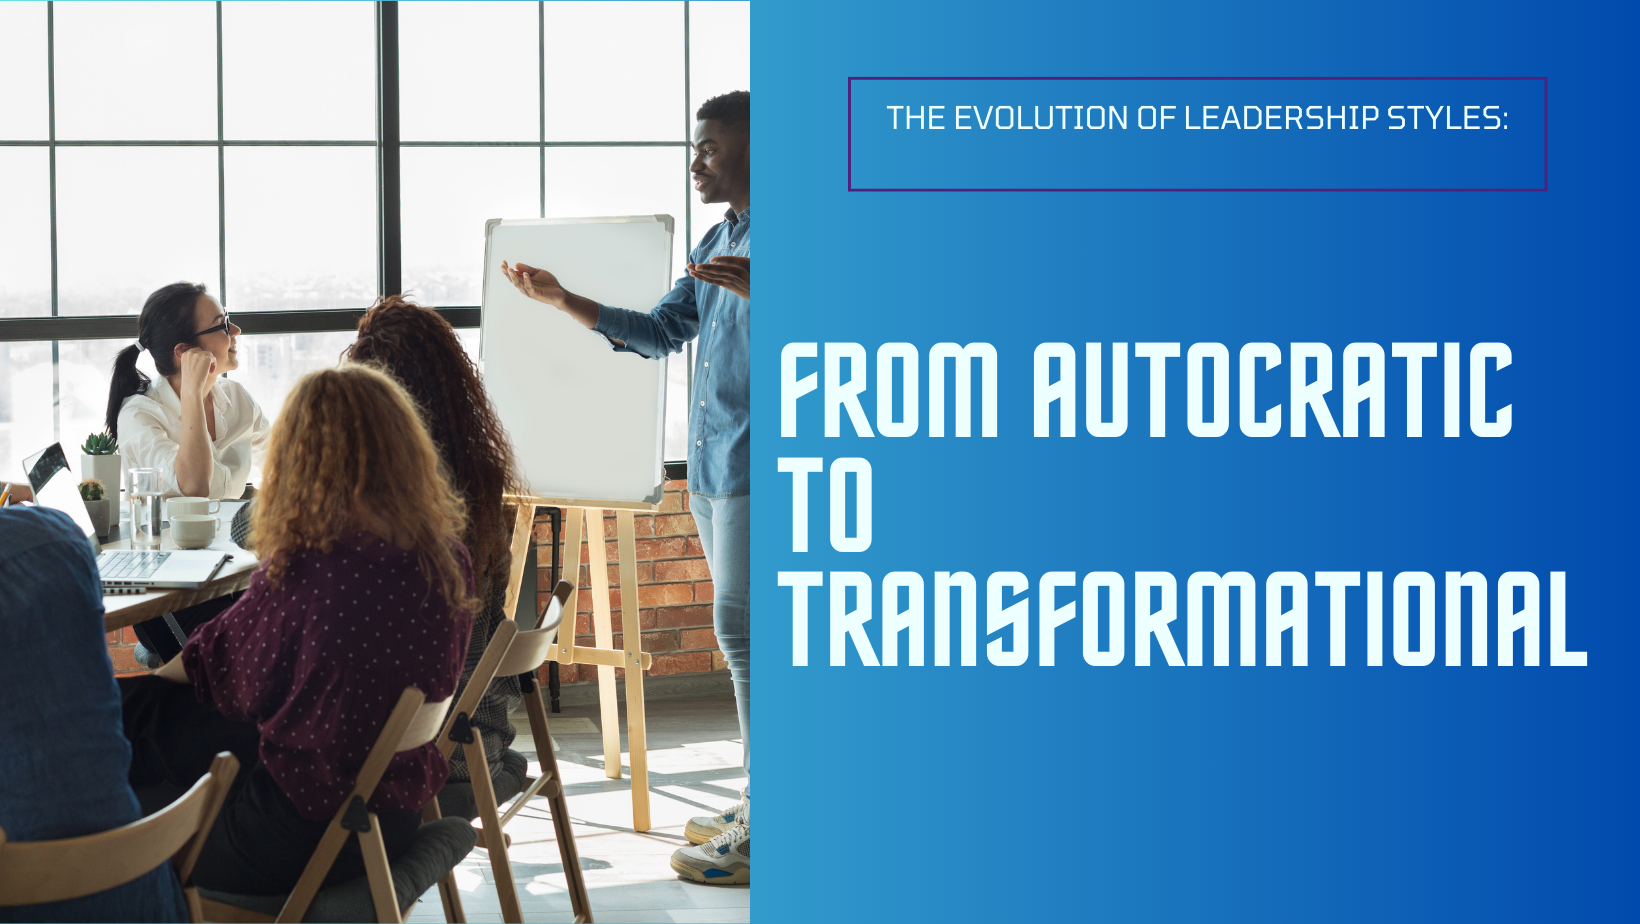 The Evolution of Leadership Styles: From Autocratic to Transformational